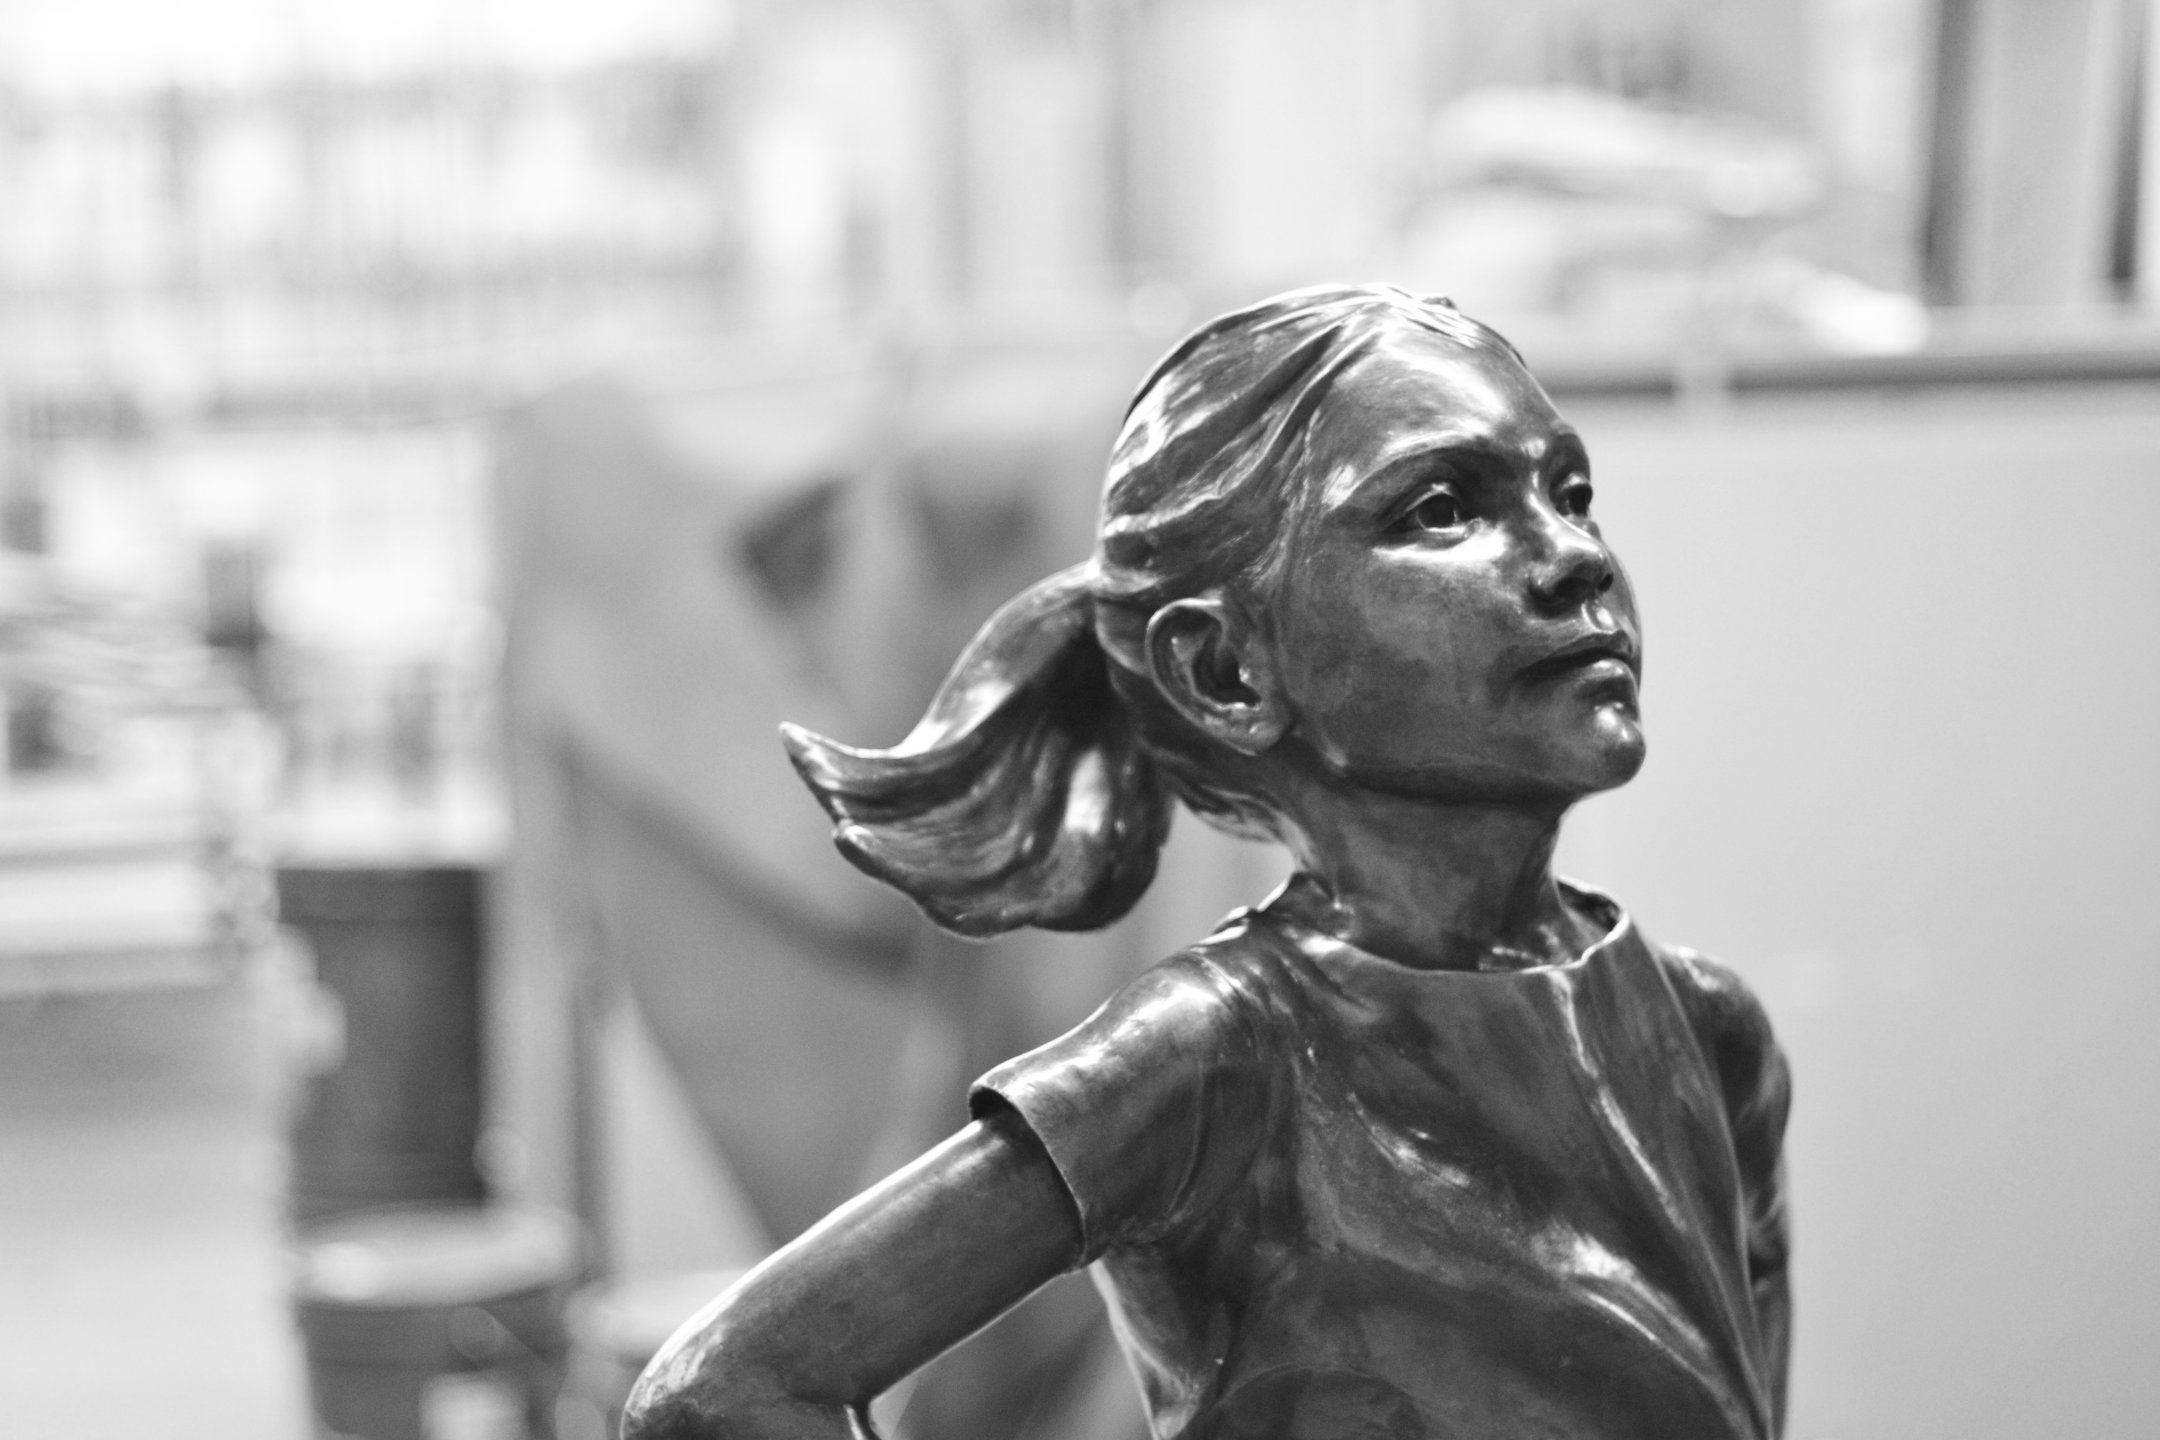 Photos: Statue of 'fearless girl' staring down Wall Street bull